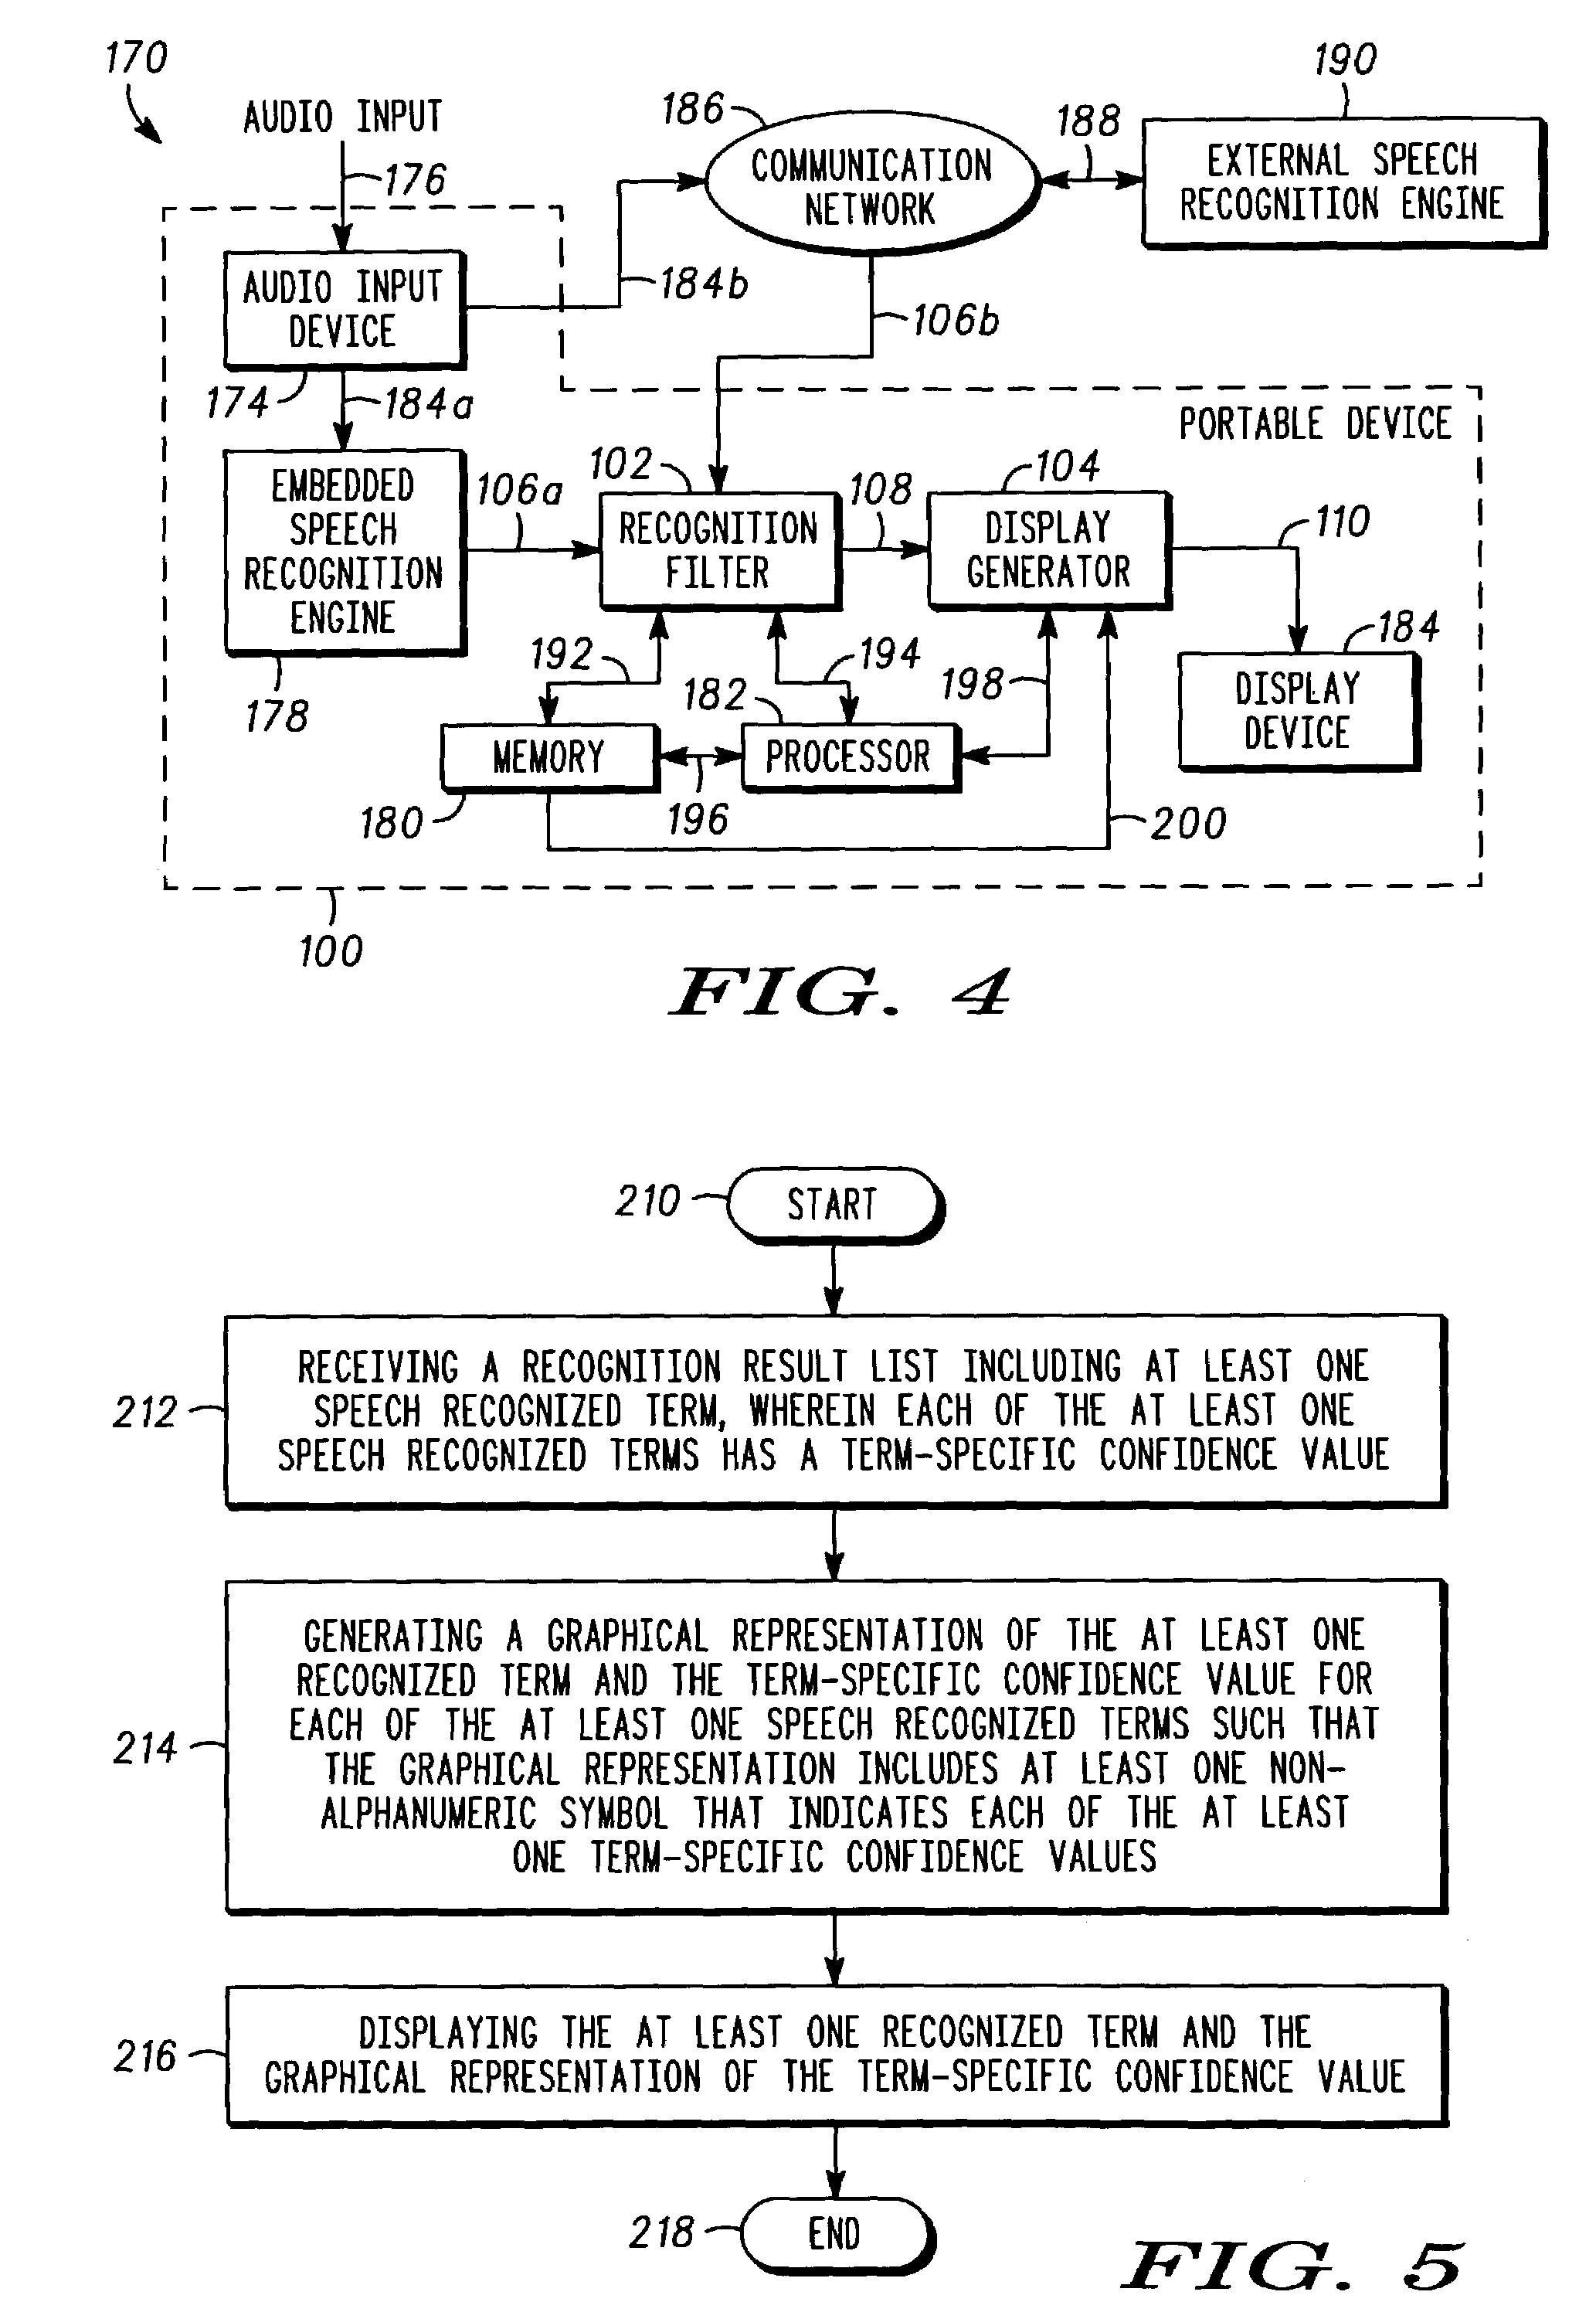 Method and apparatus for displaying speech recognition results